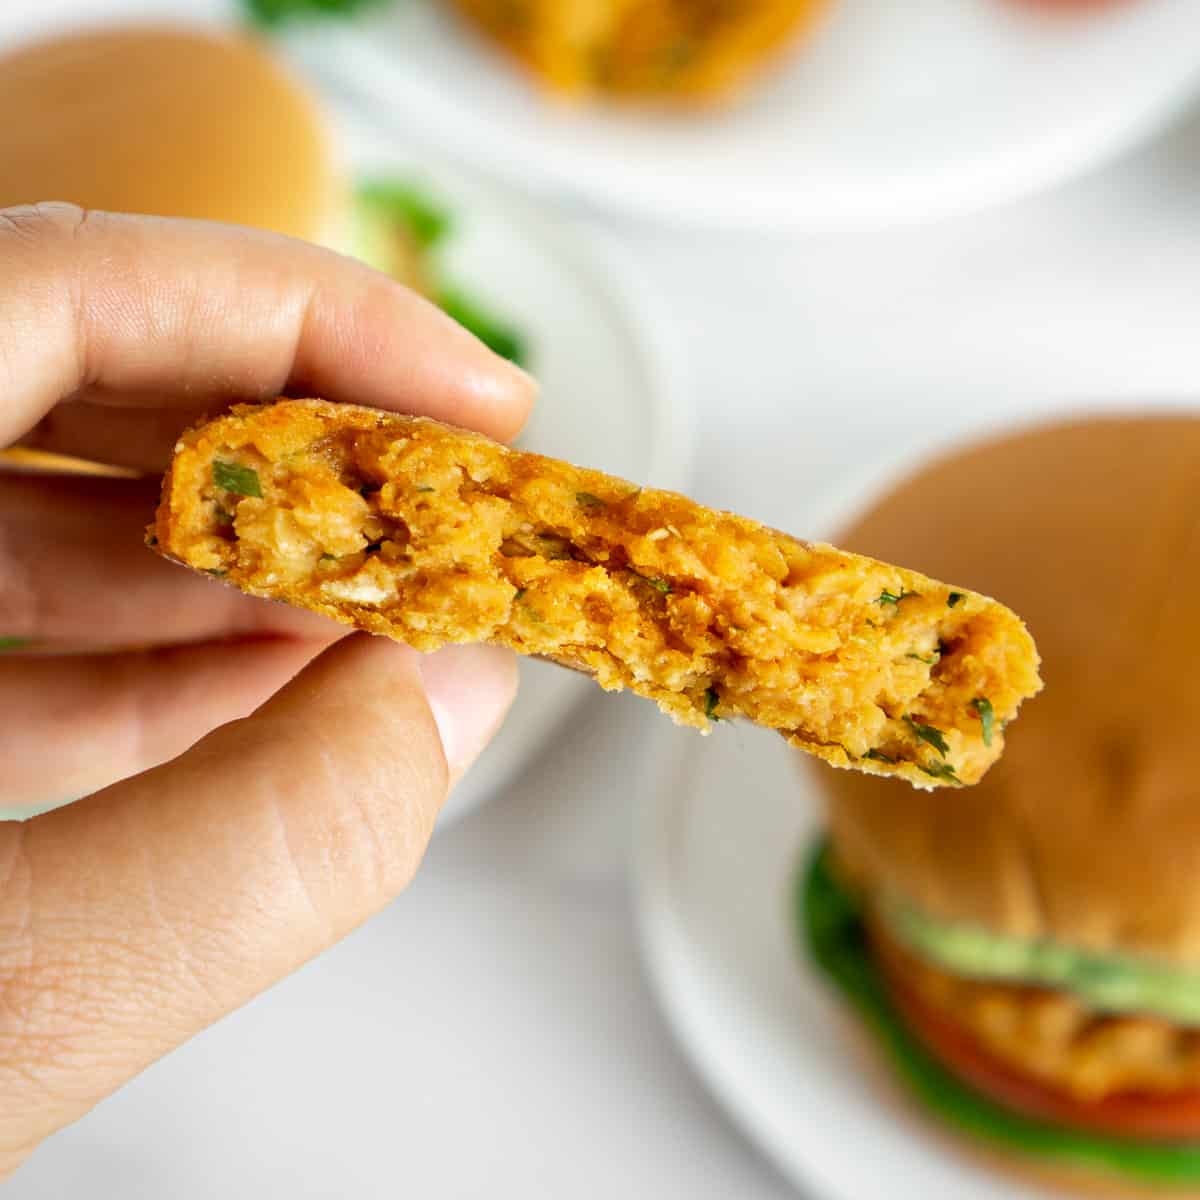 hand holding vegan lentil patty cut in half to show inside texture